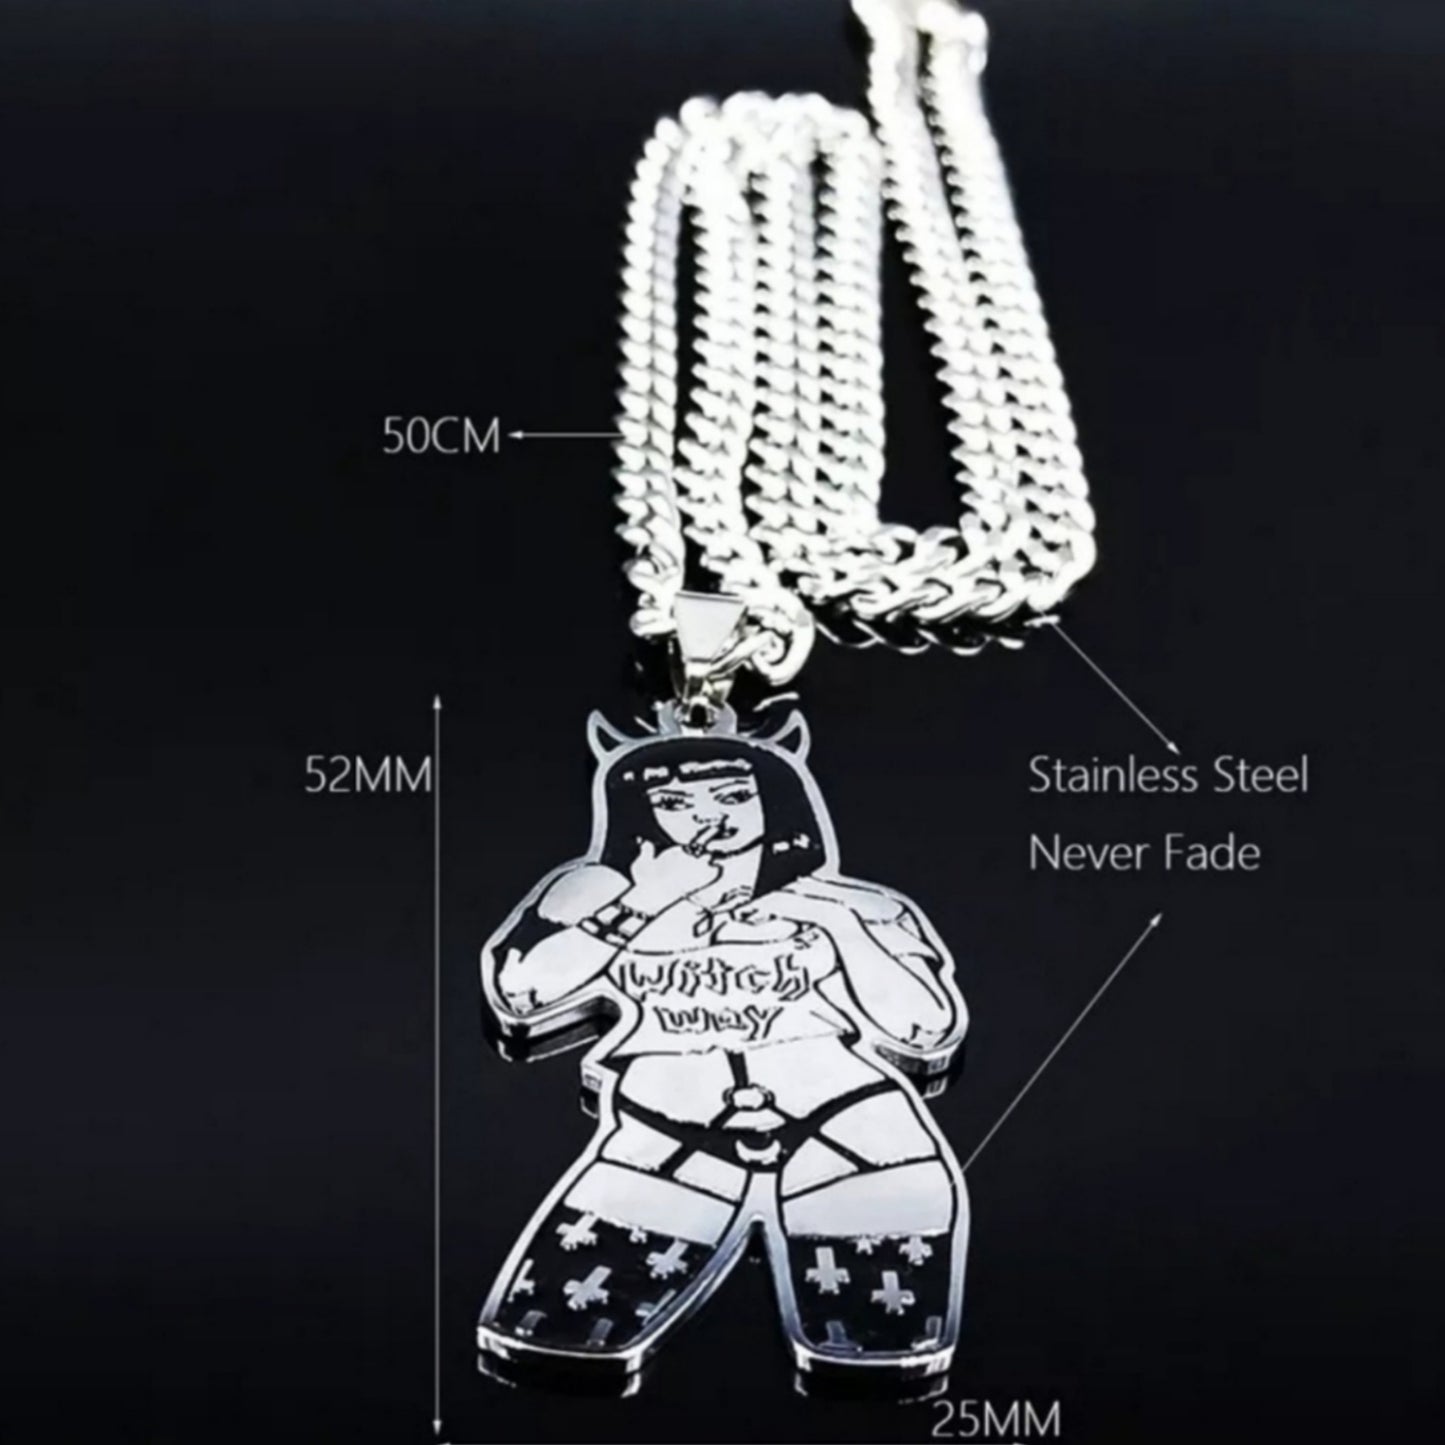 Stainless Steel Necklace | Witch Girl Gothic Silver & Black Necklace - A Gothic Universe - Necklaces